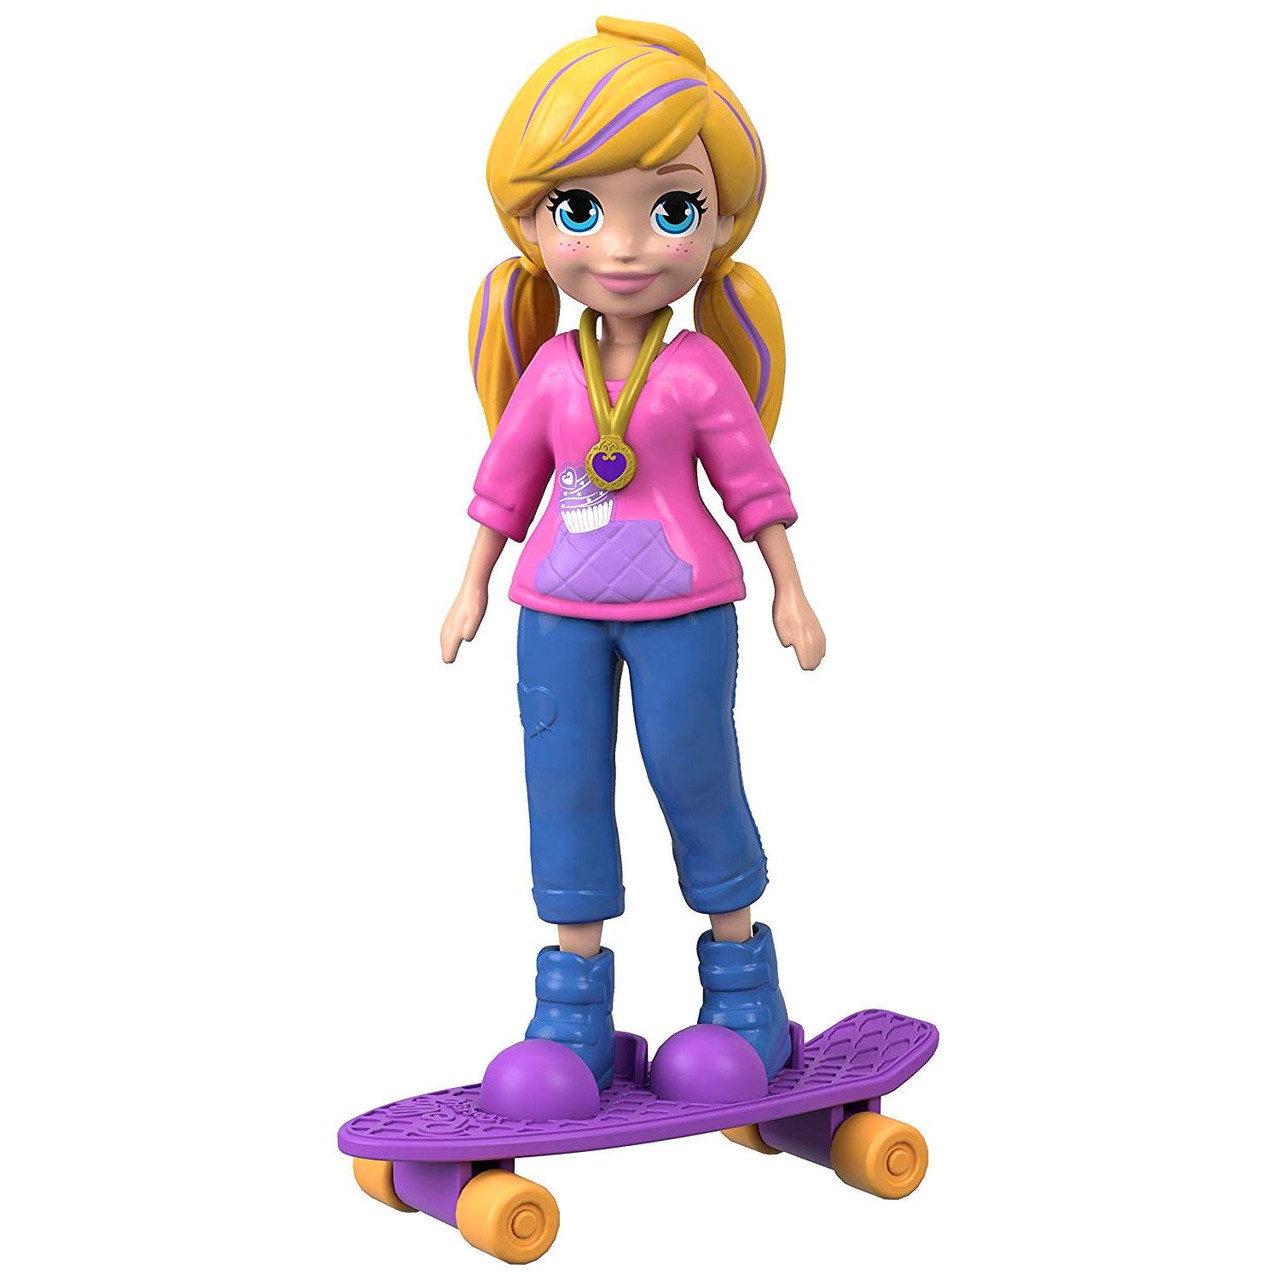 polly pocket awesomely active pack